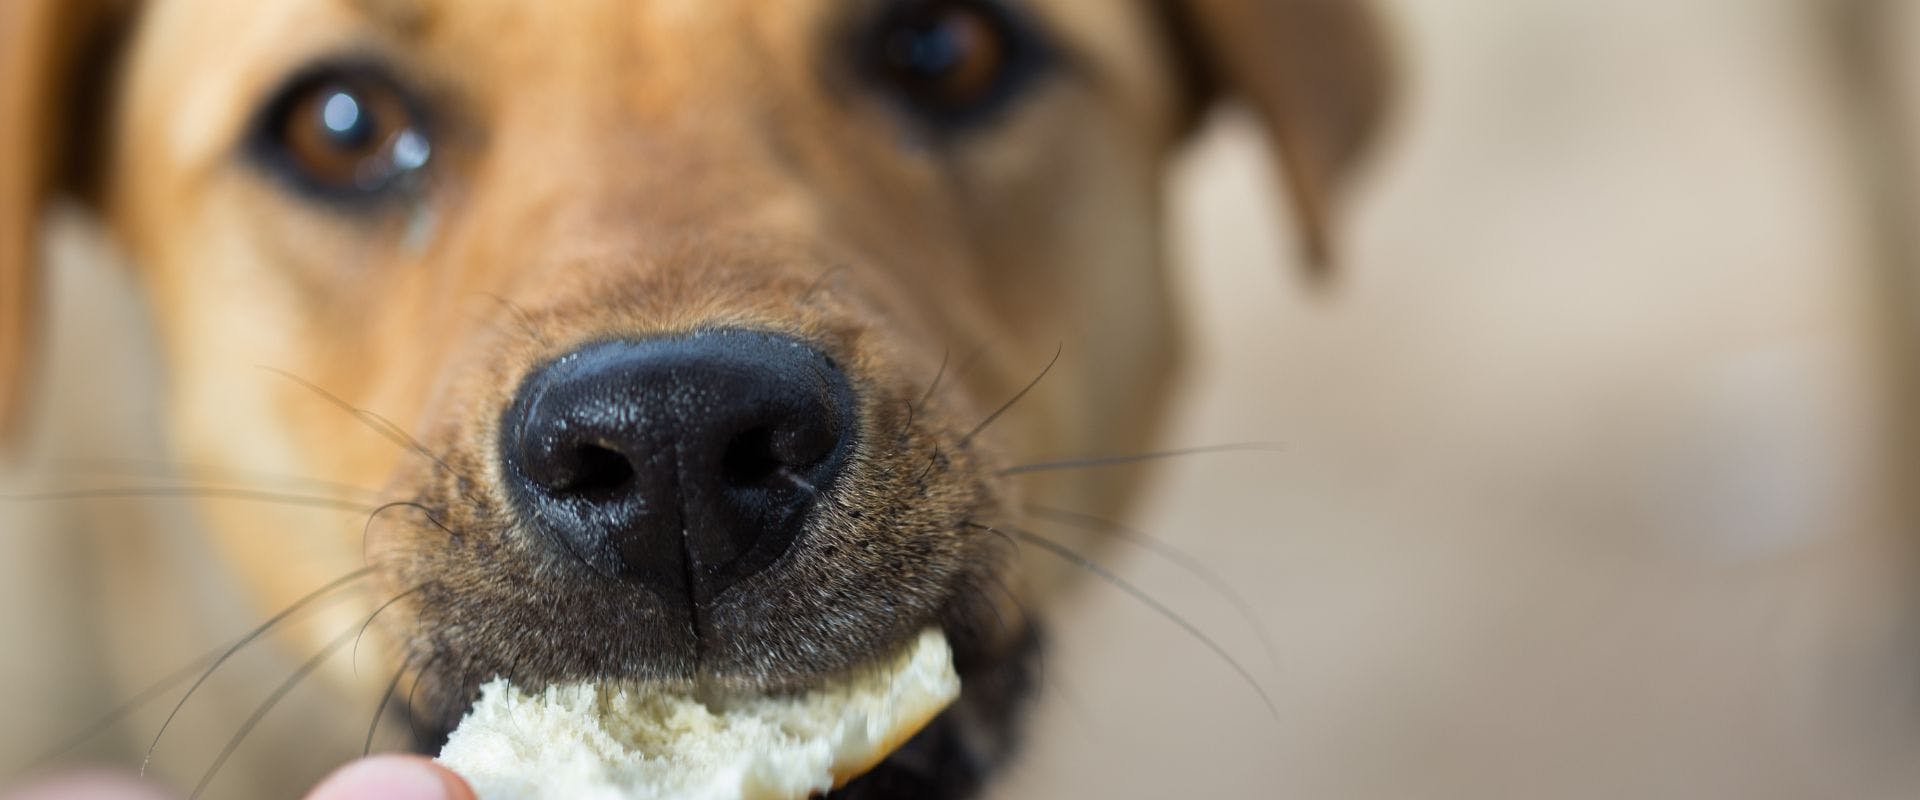 Close up of brown dog eating bread